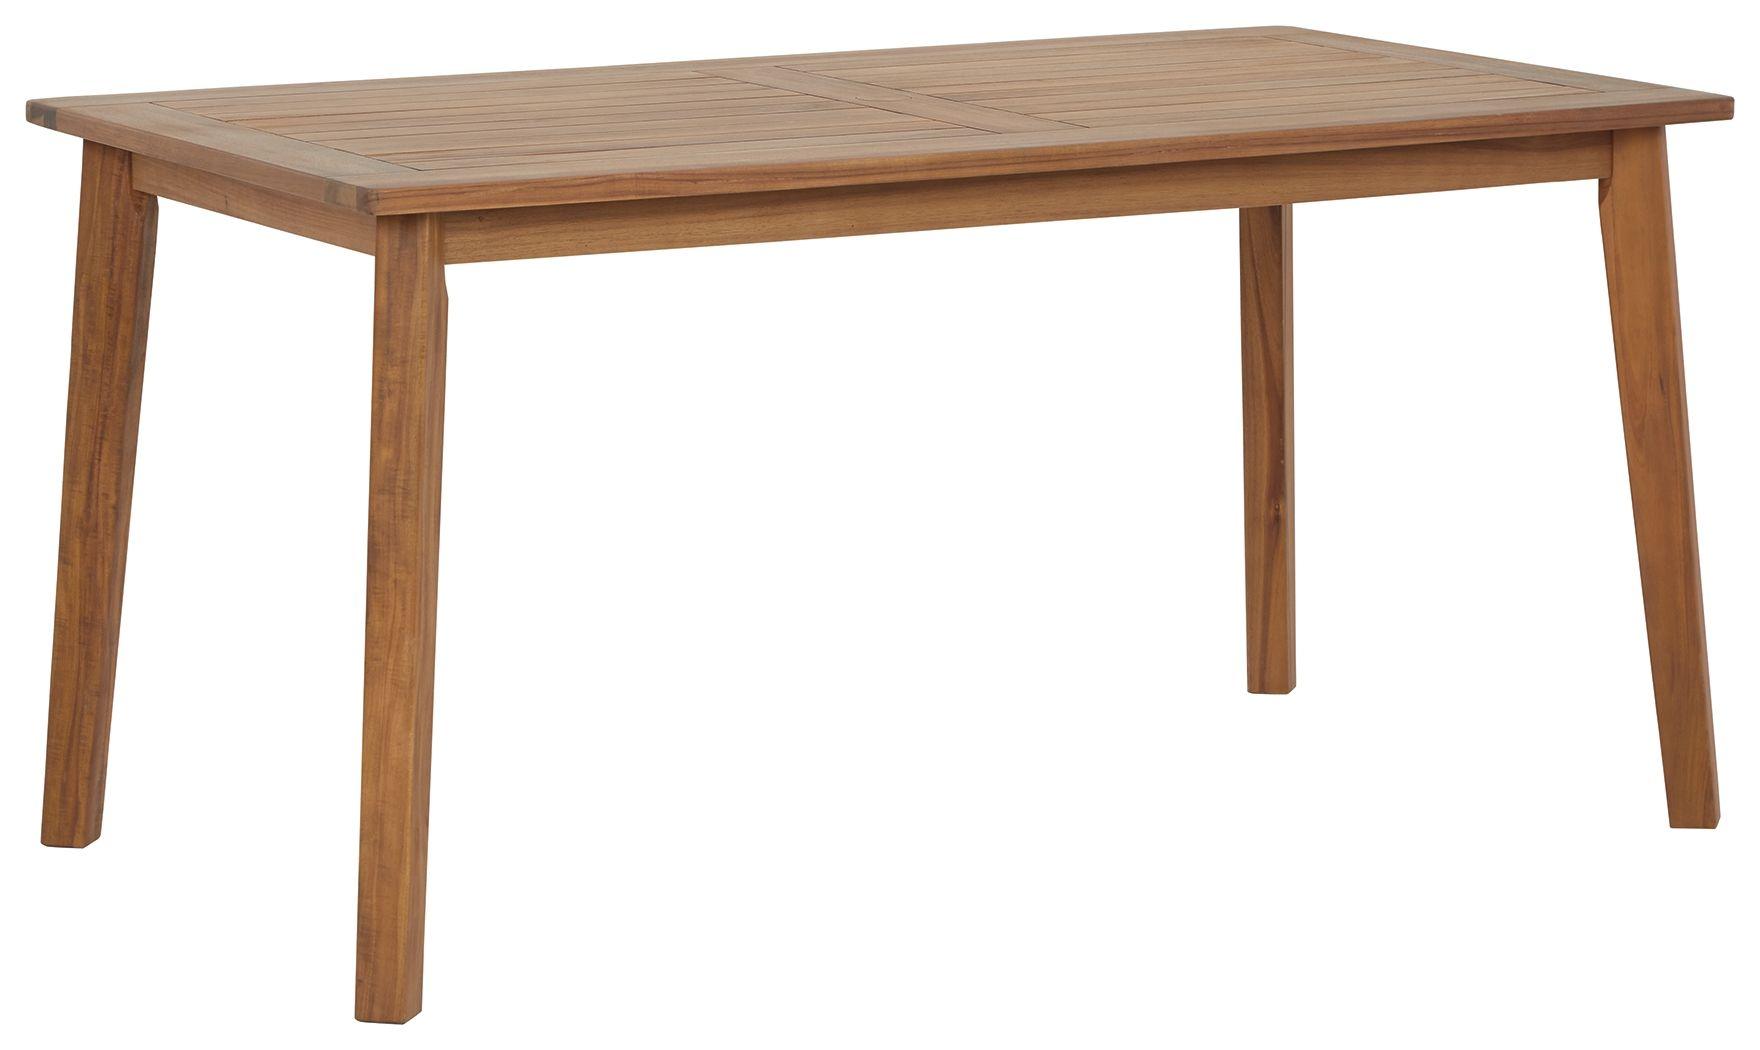 Signature Design by Ashley® - Janiyah - Light Brown - Rectangular Dining Table - 5th Avenue Furniture